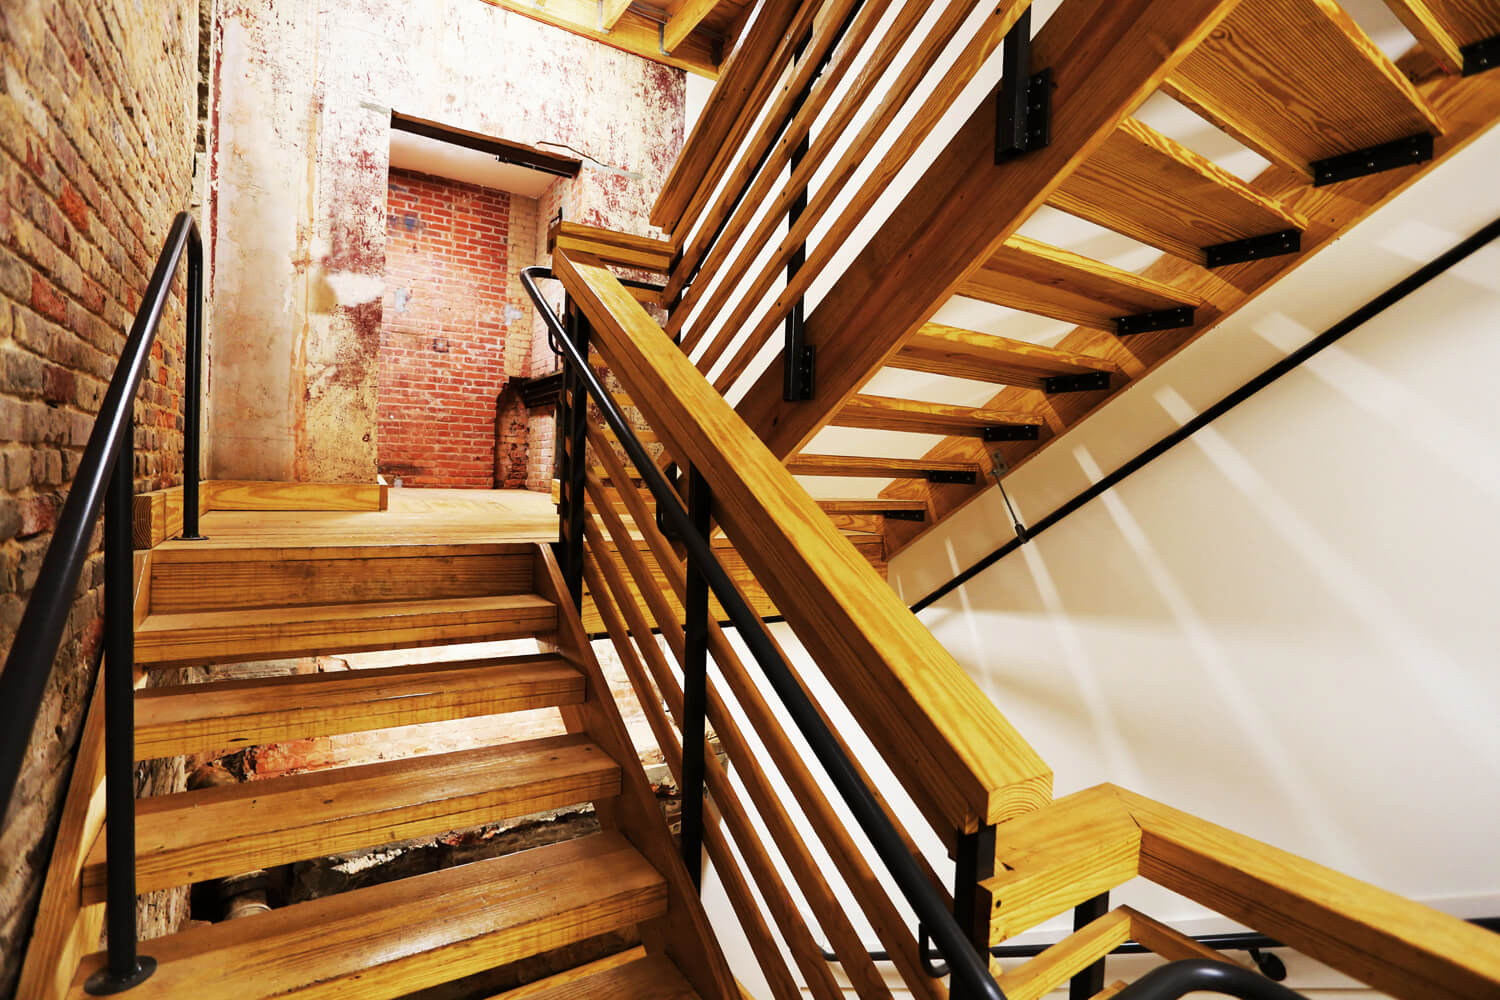 District 36 Lofts Designed by Foshee Architecture - Rear Wood Stairs with Exposed Brick Walls